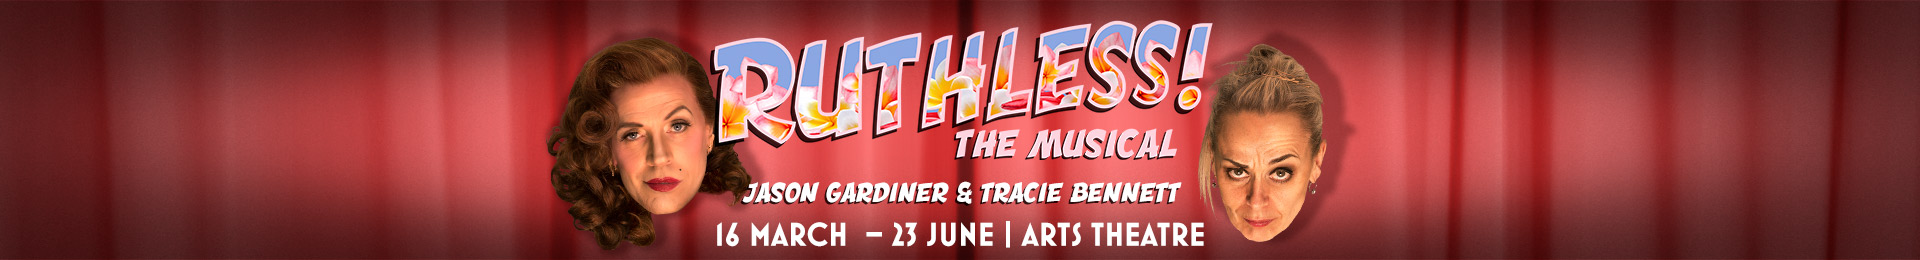 Ruthless! The Musical tickets